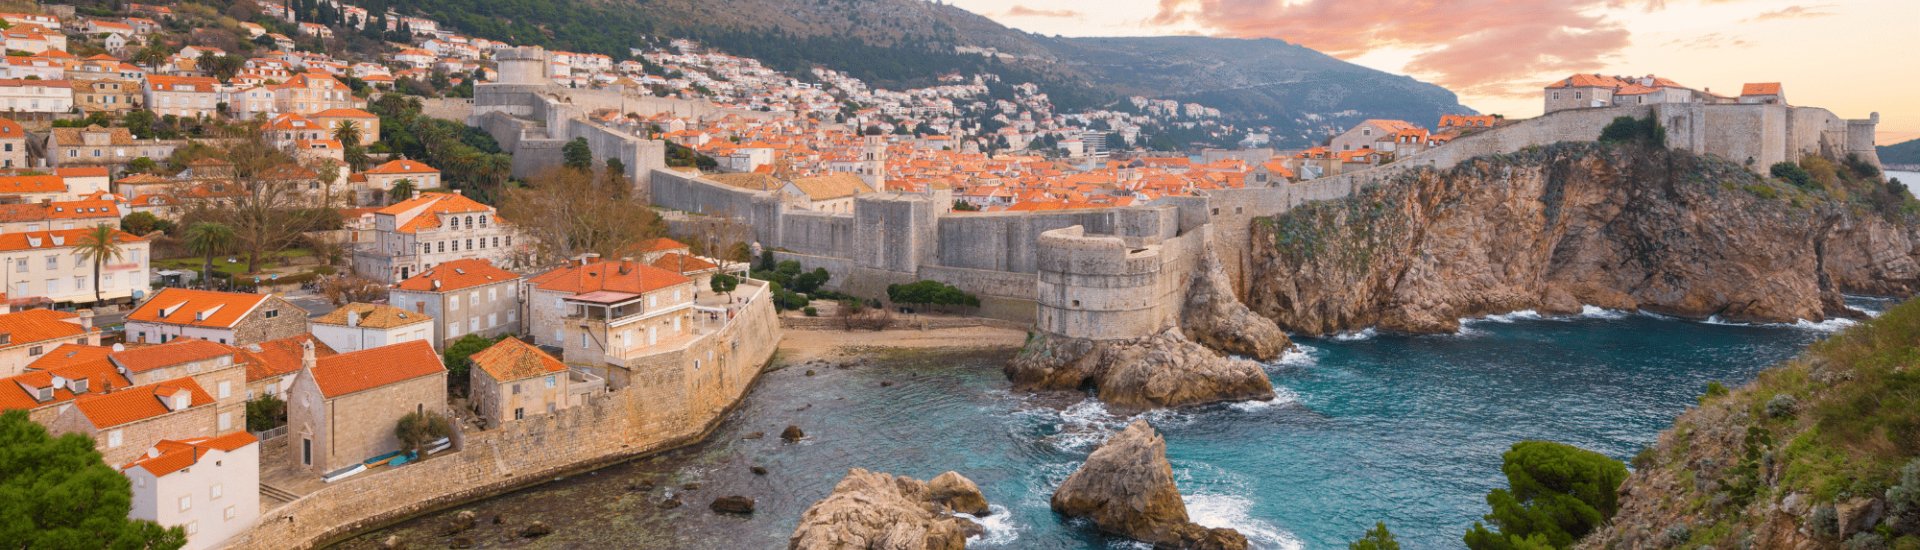 sunset view of dubrovnik castle and bay